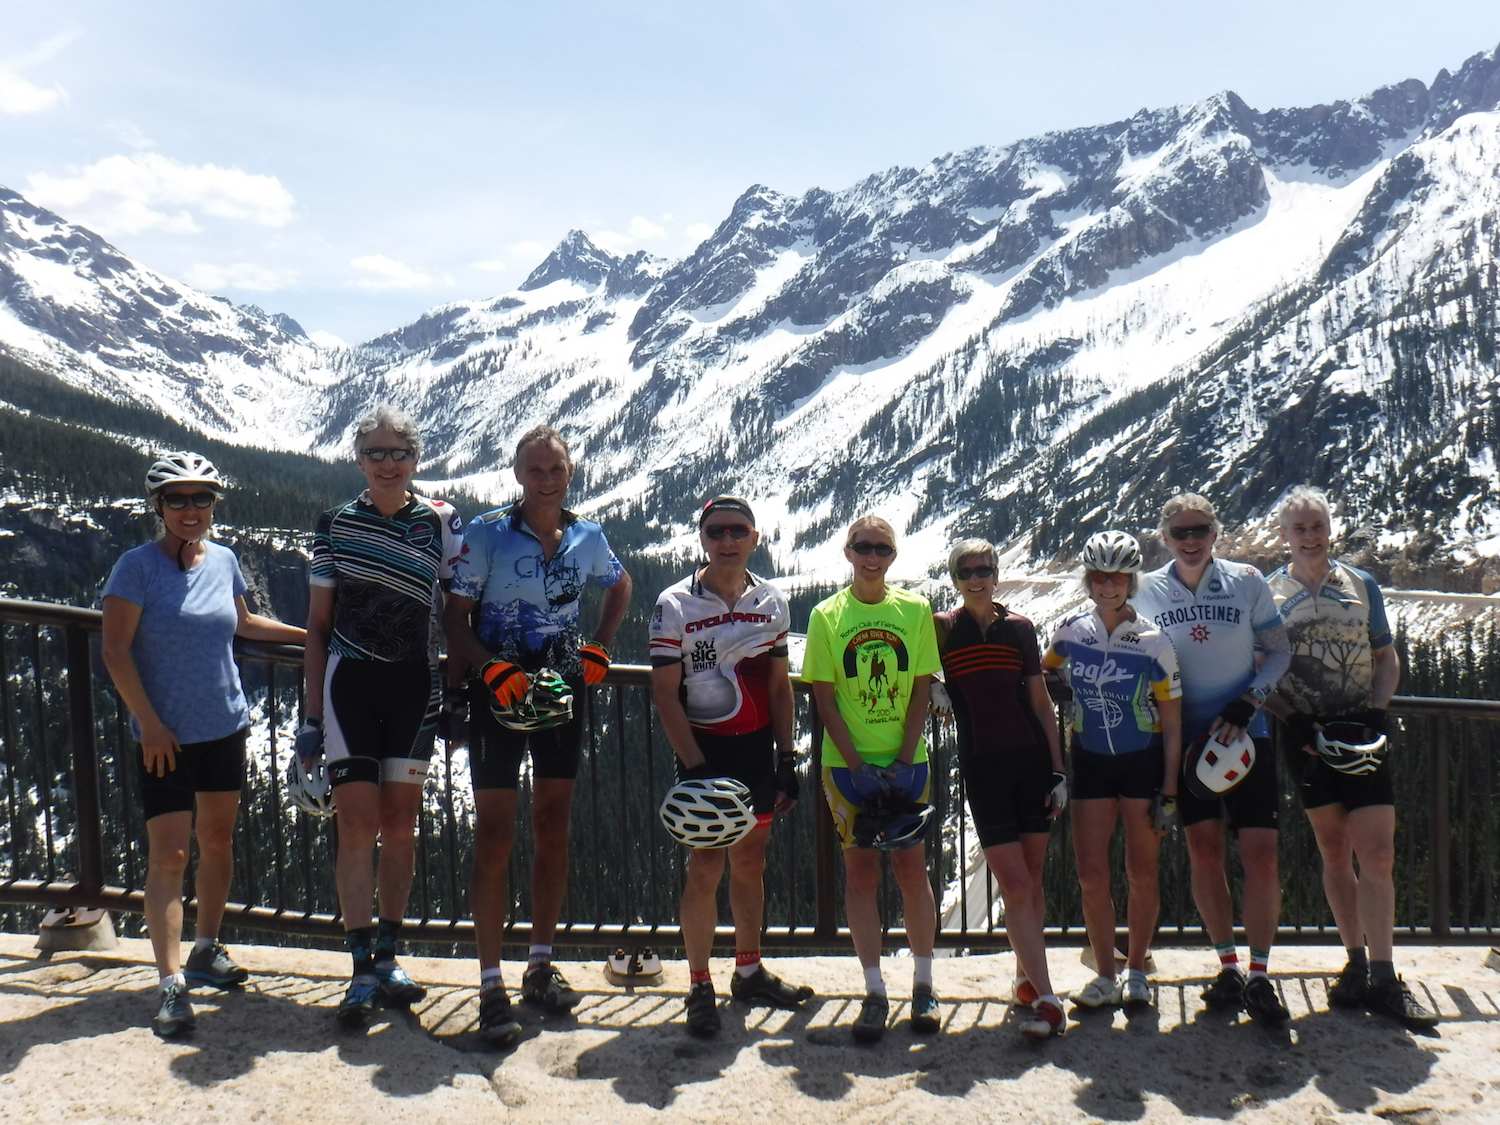 The crew at the top of Washington Pass